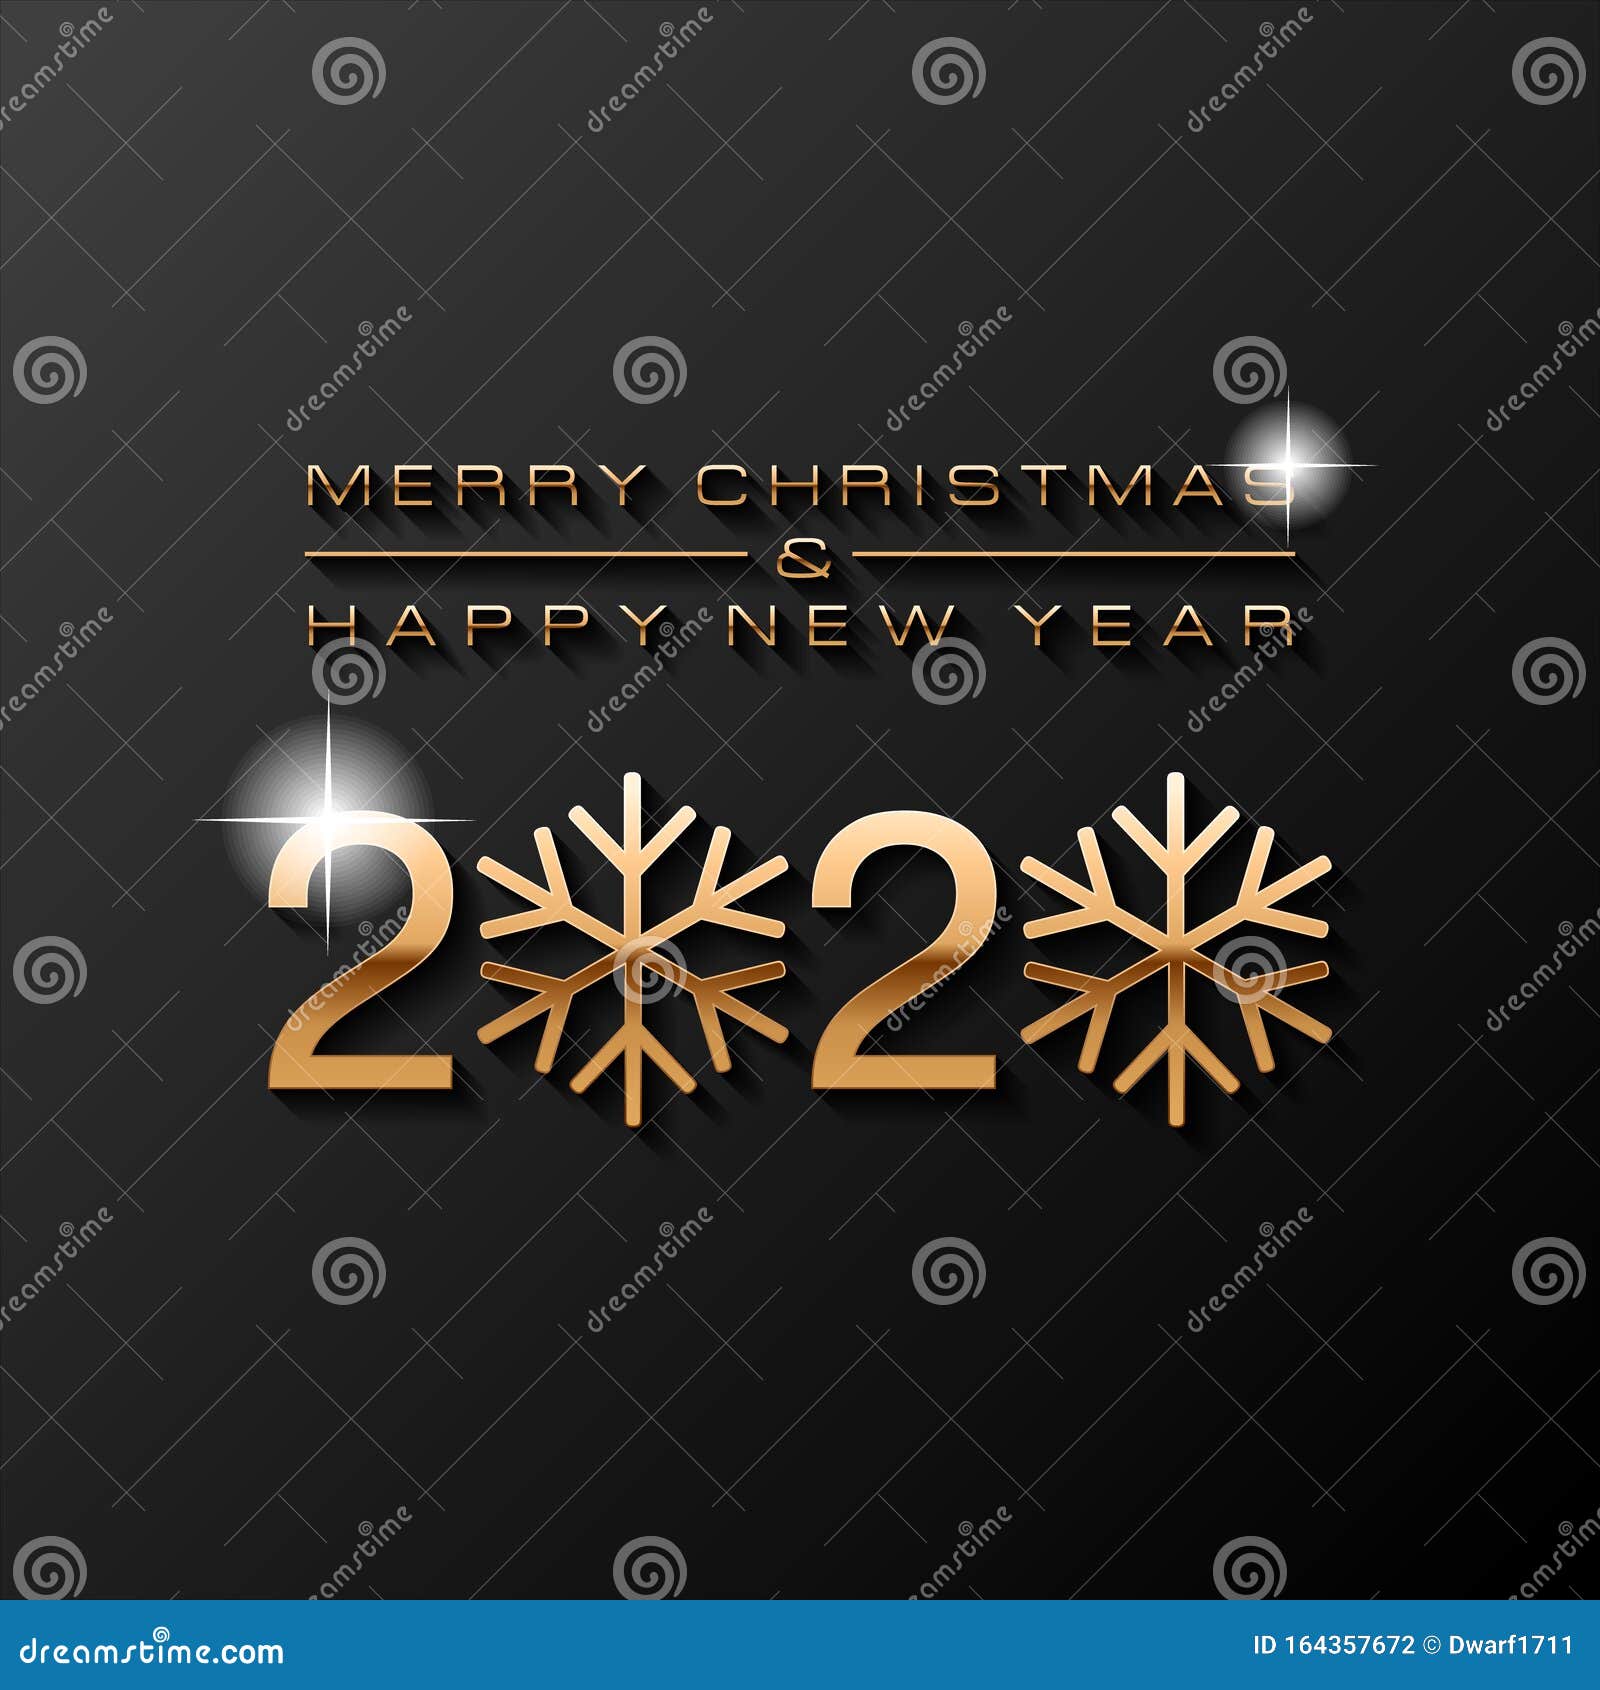 2020 Merry Christmas and Happy New Year golden text with snowflakes on black background. Square social media post or banner vector template.